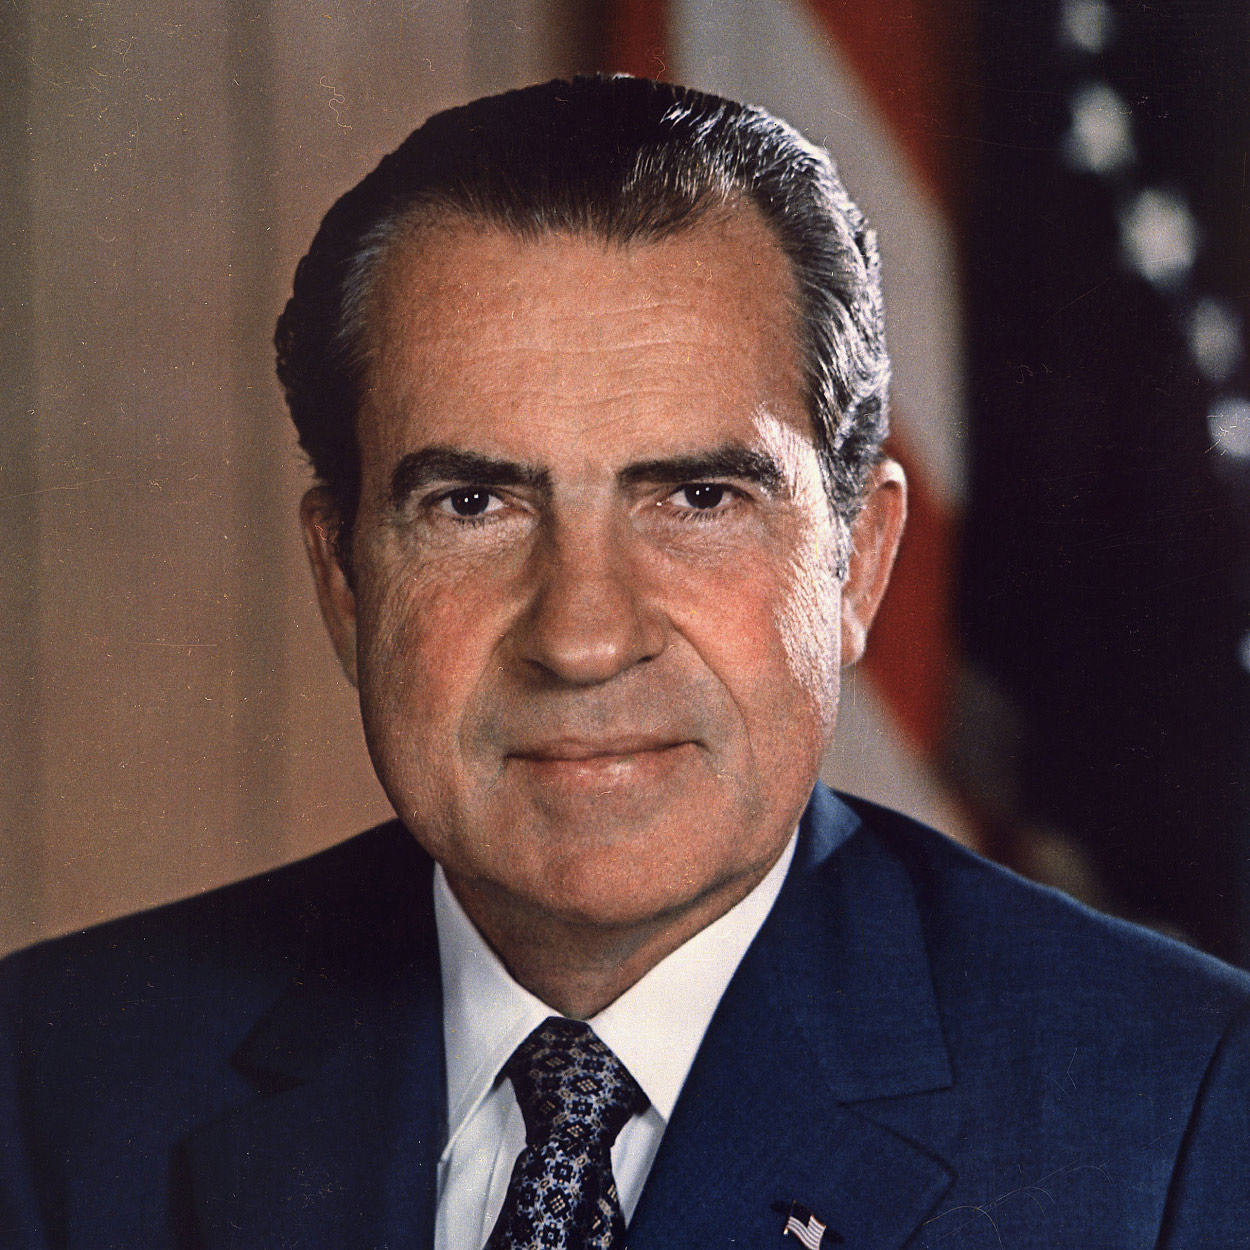 Portrait of Richard M. Nixon, the 37th President of the United States